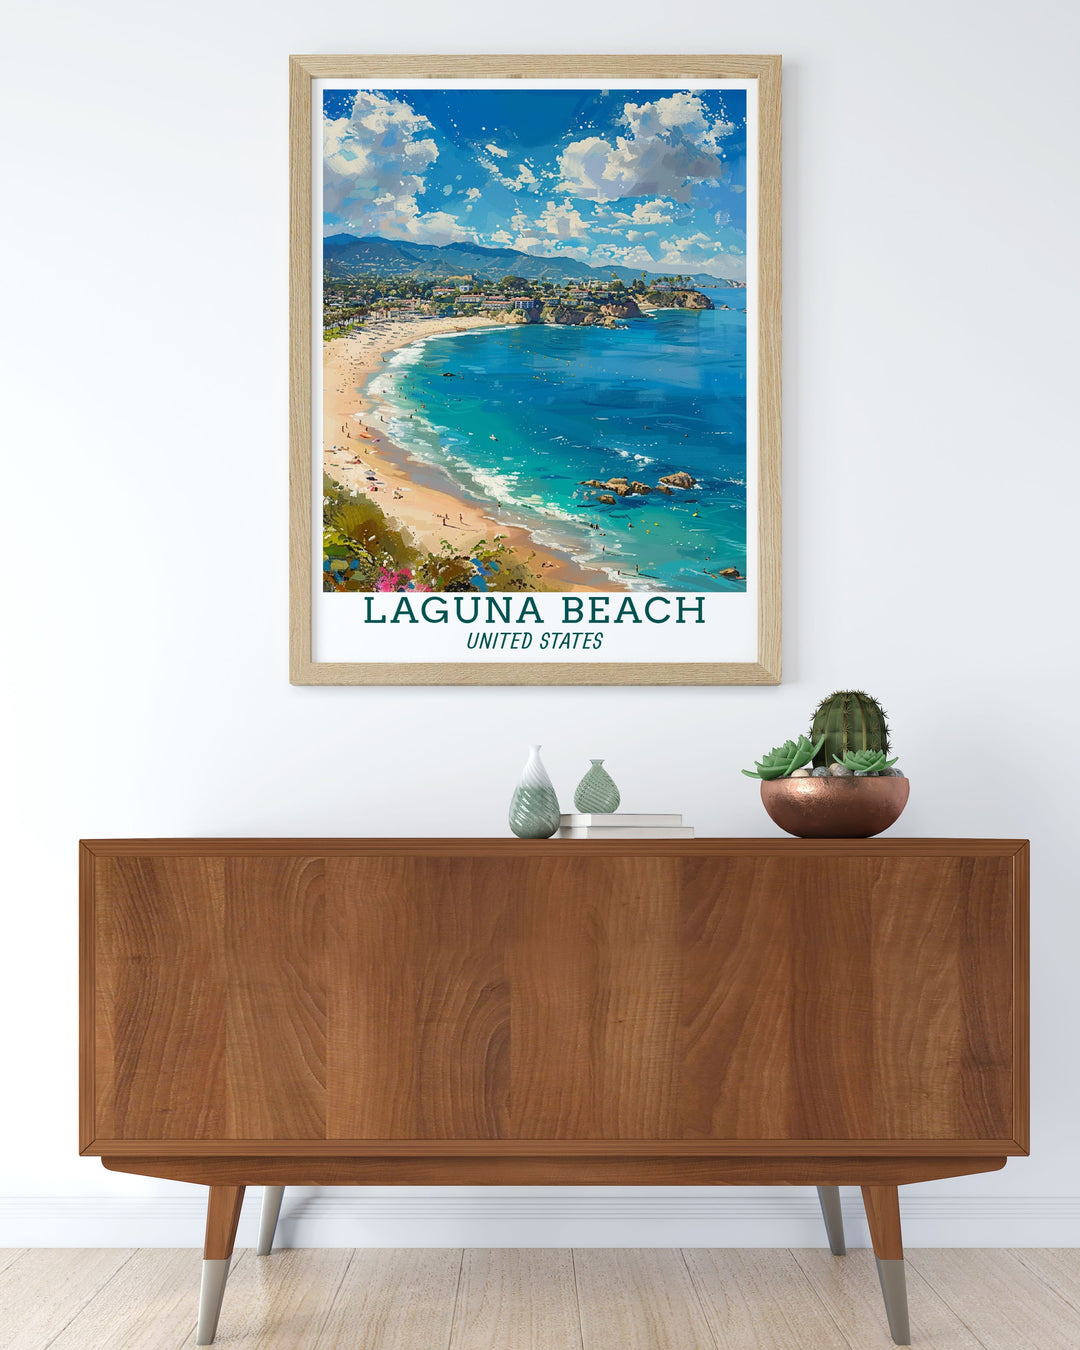 Stunning Living Room Decor with Main Beach Modern Prints captures the vibrant and serene vibes of Laguna Beach ideal for enhancing your home or office space.